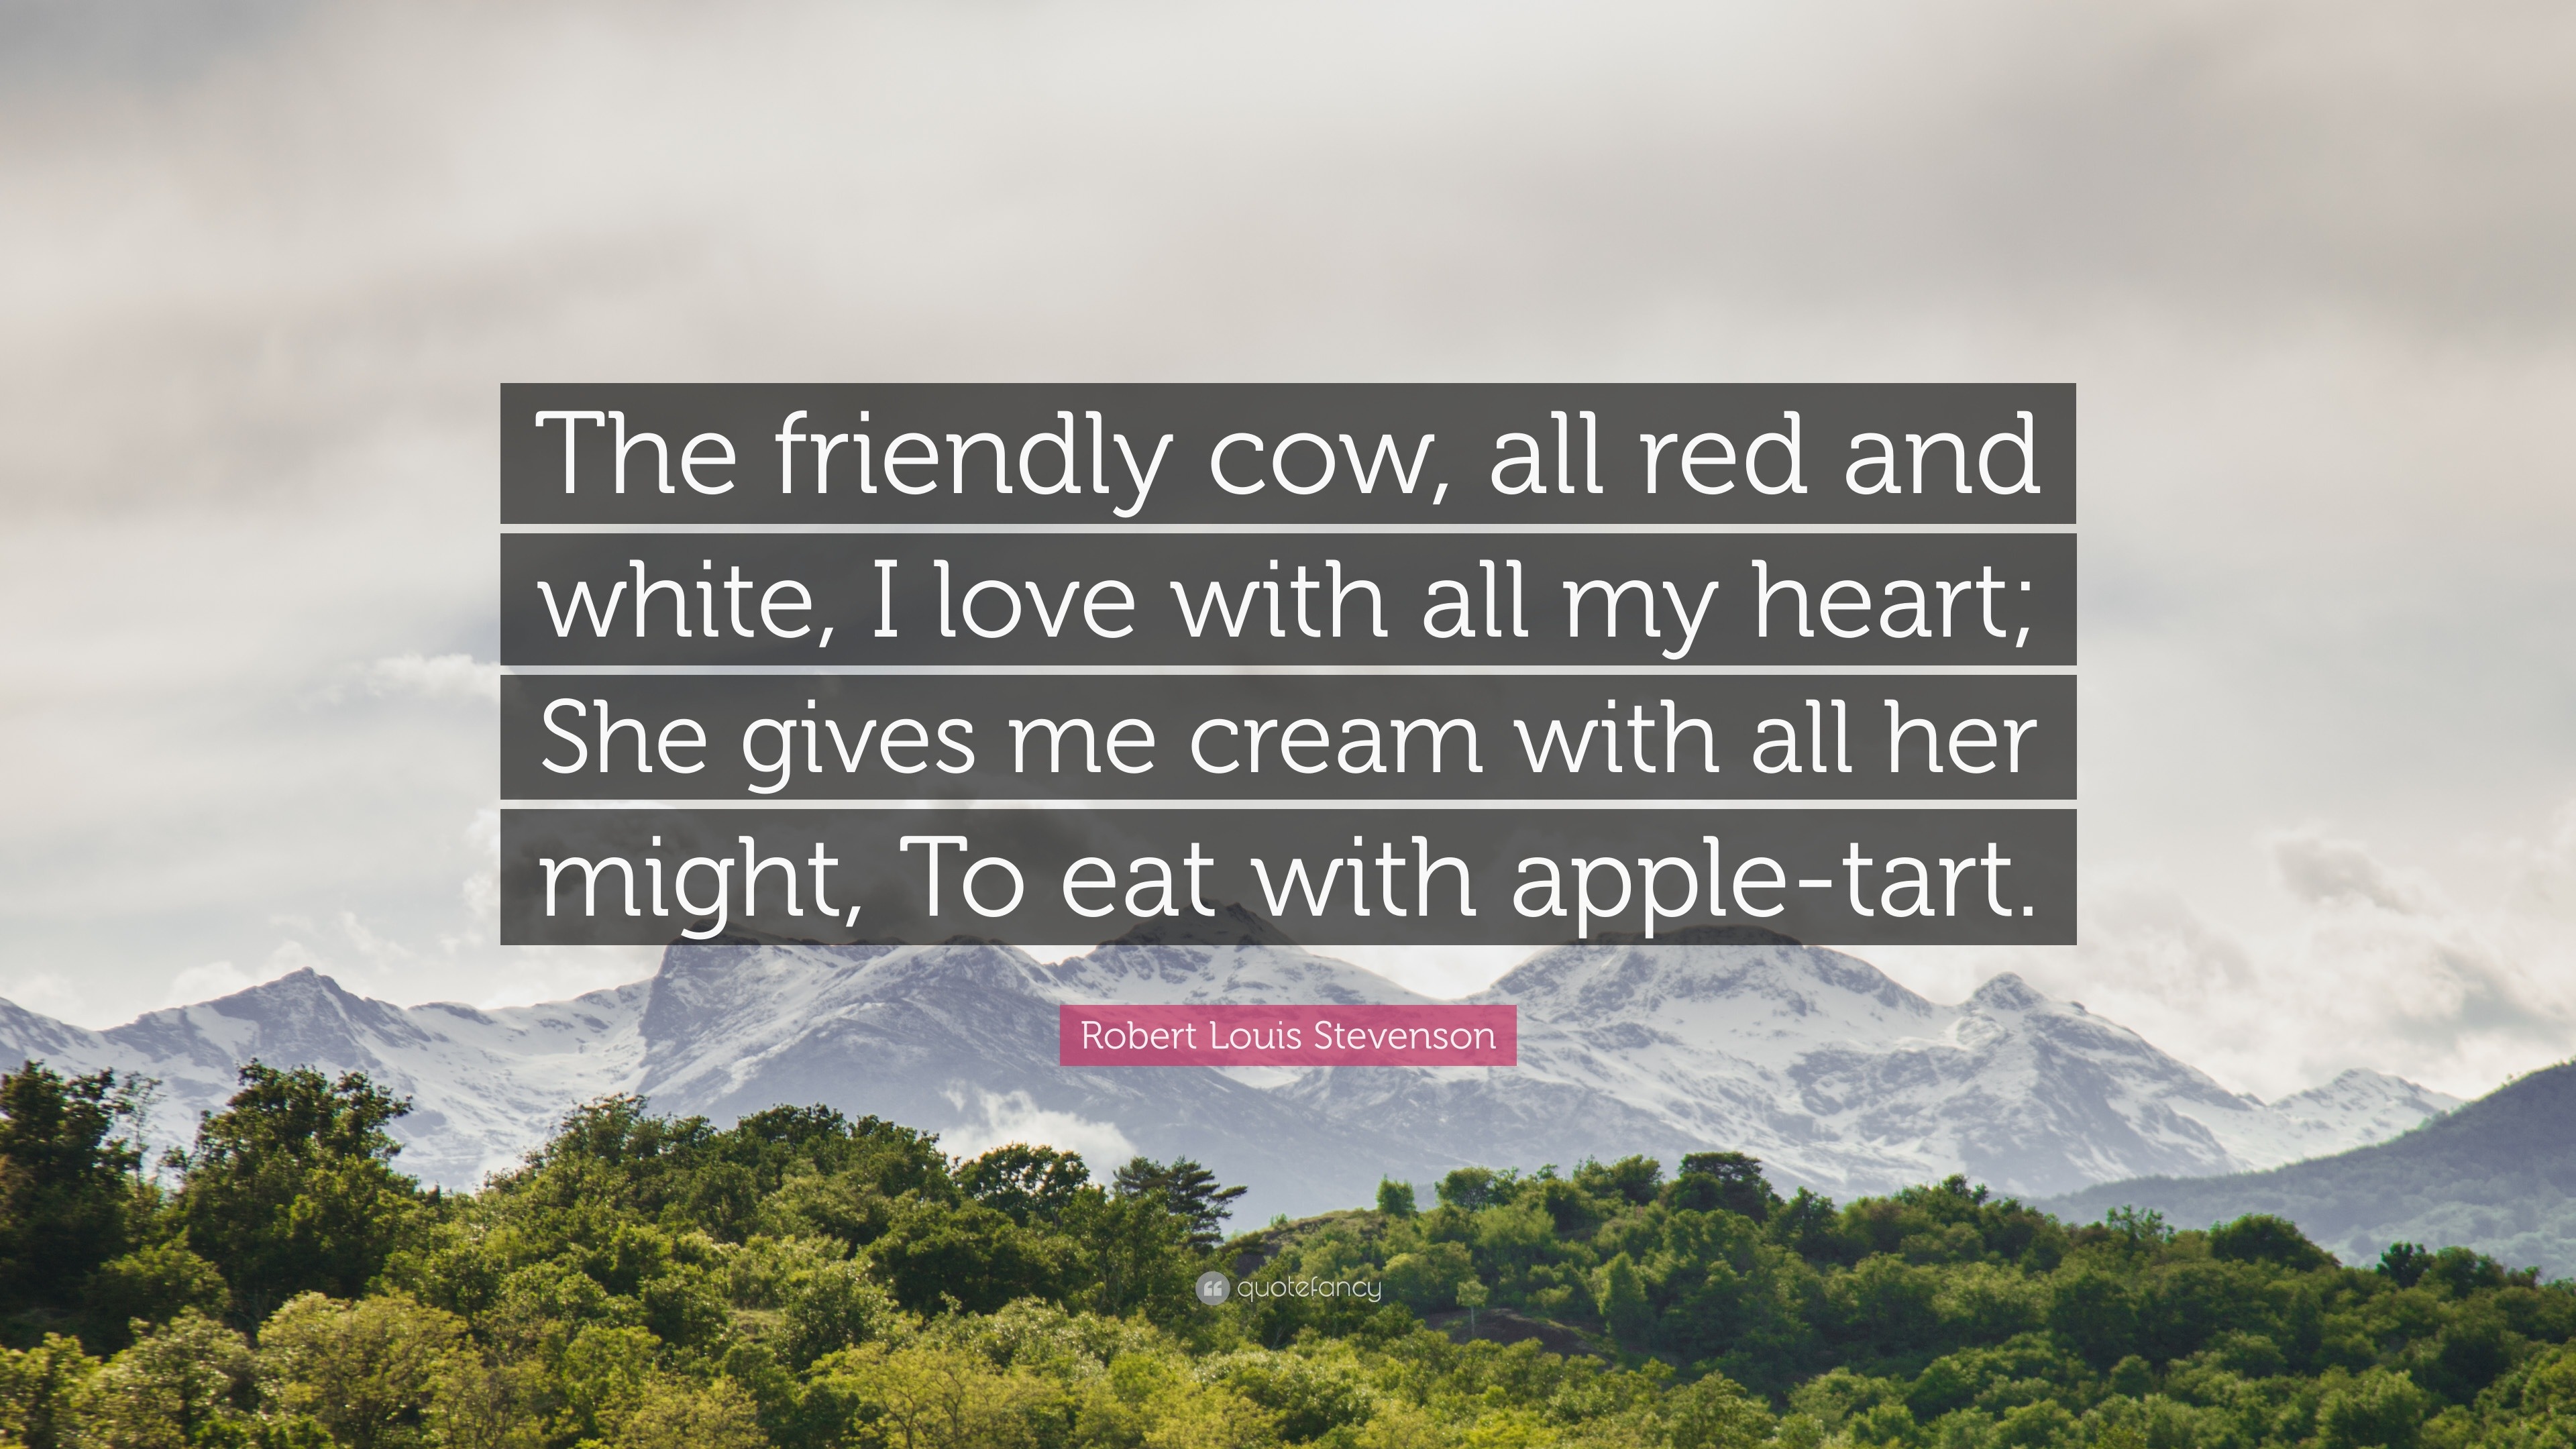 Robert Louis Stevenson Quote “The friendly cow all red and white I